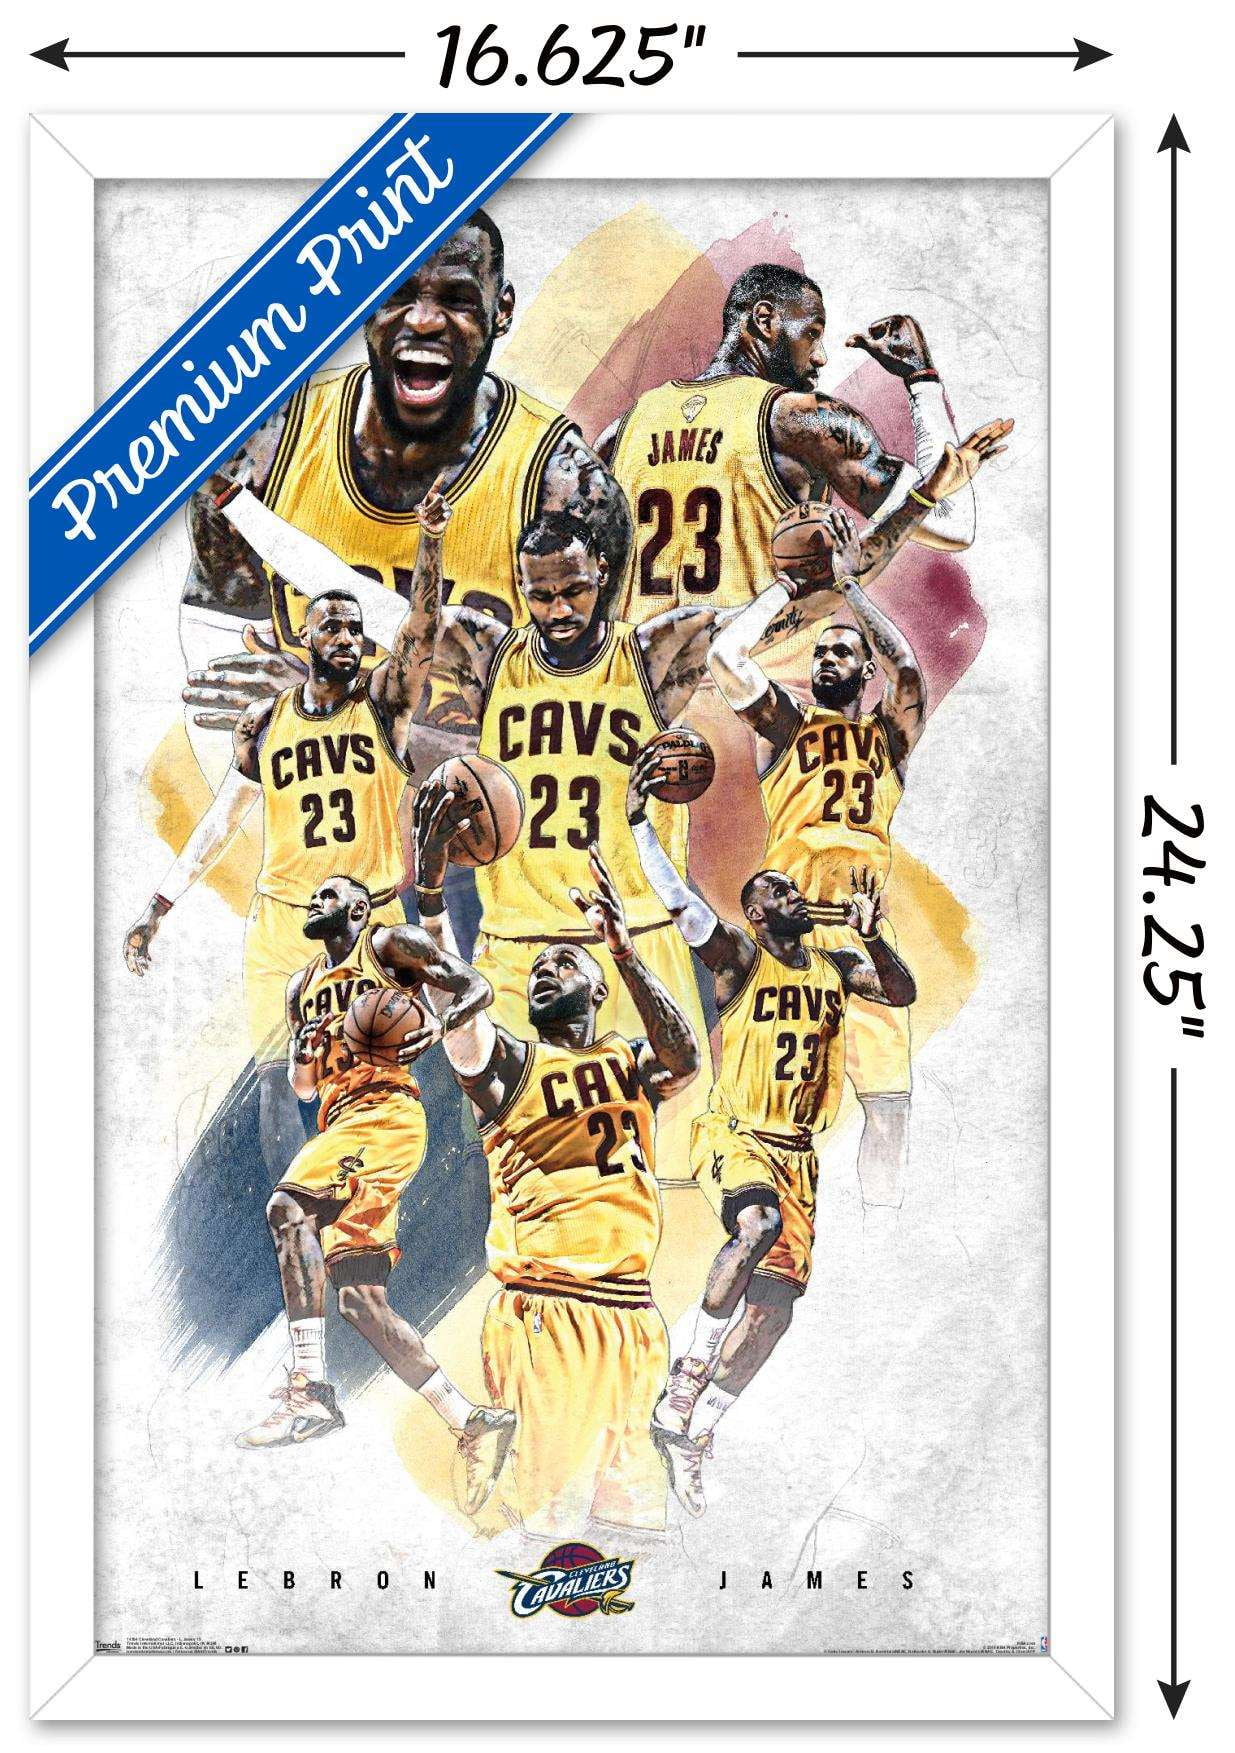 LeBron James Word Art Poster | Cleveland Cavaliers Gifts & Decor - 16x20 Standard Size Print